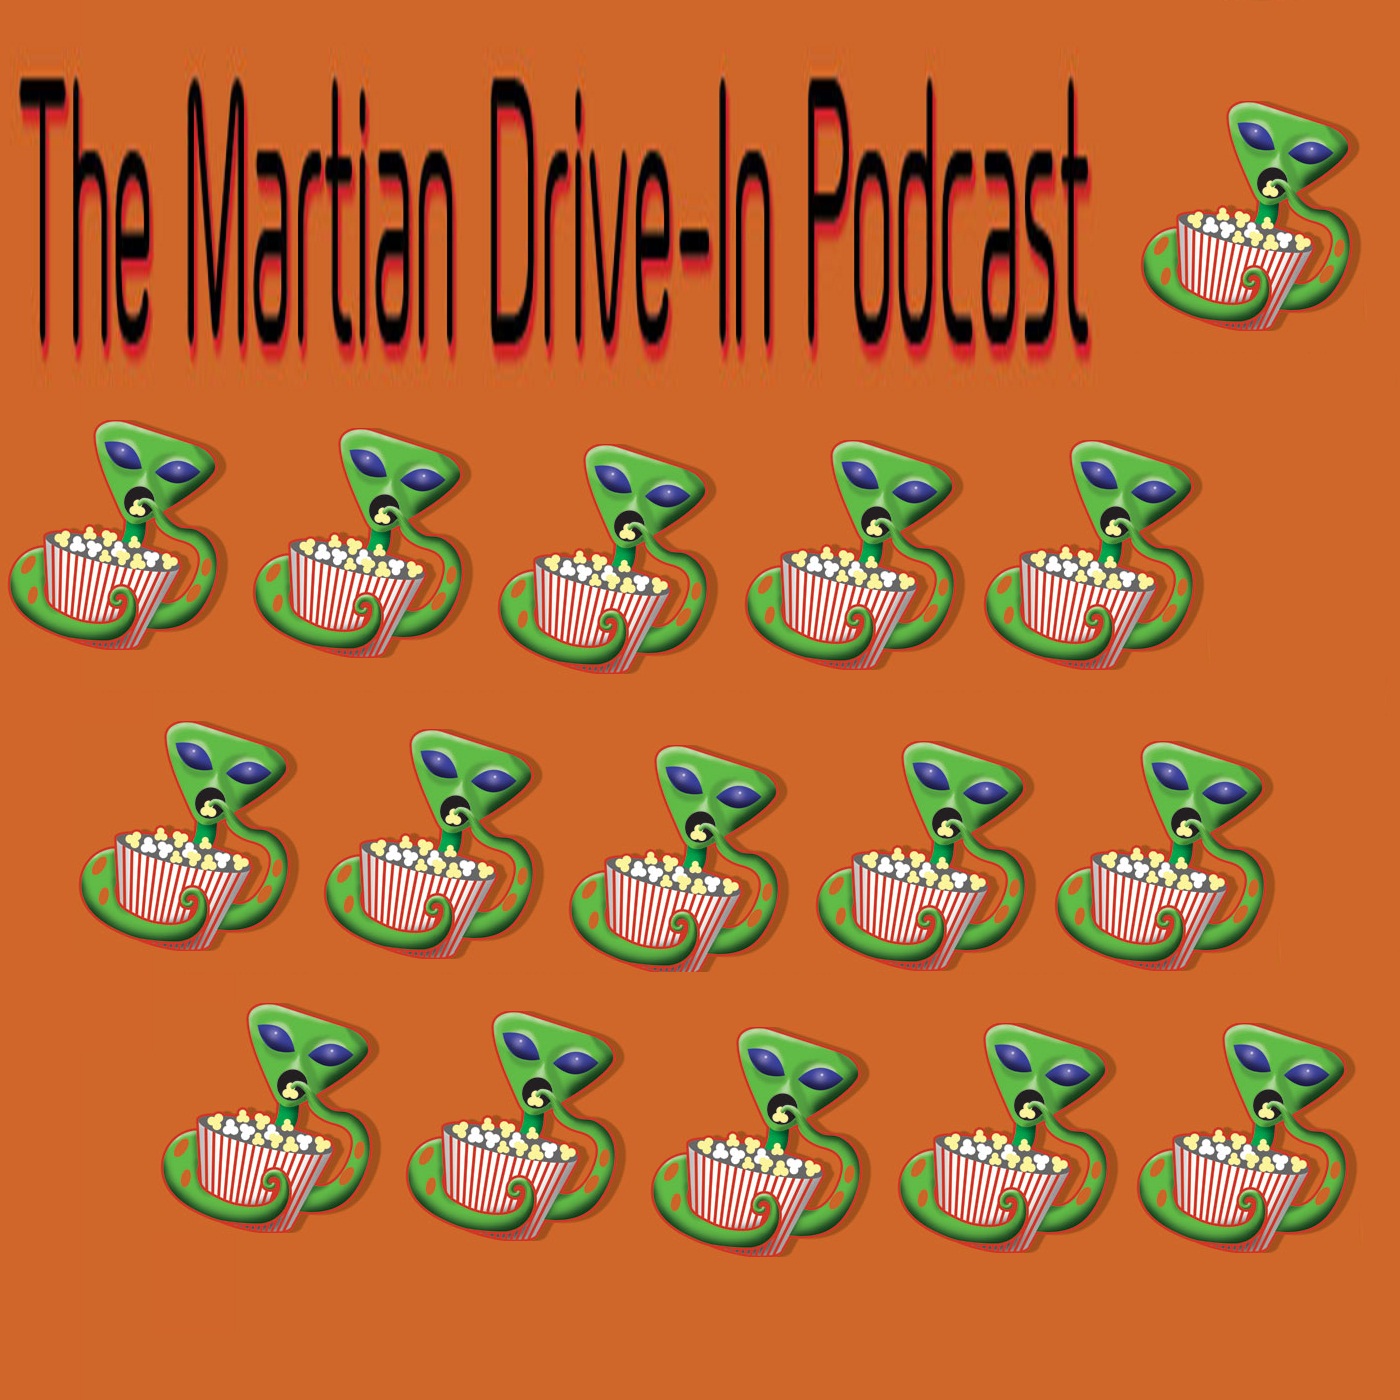 The Martian Drive In Podcast #13 Undead Daybreakers